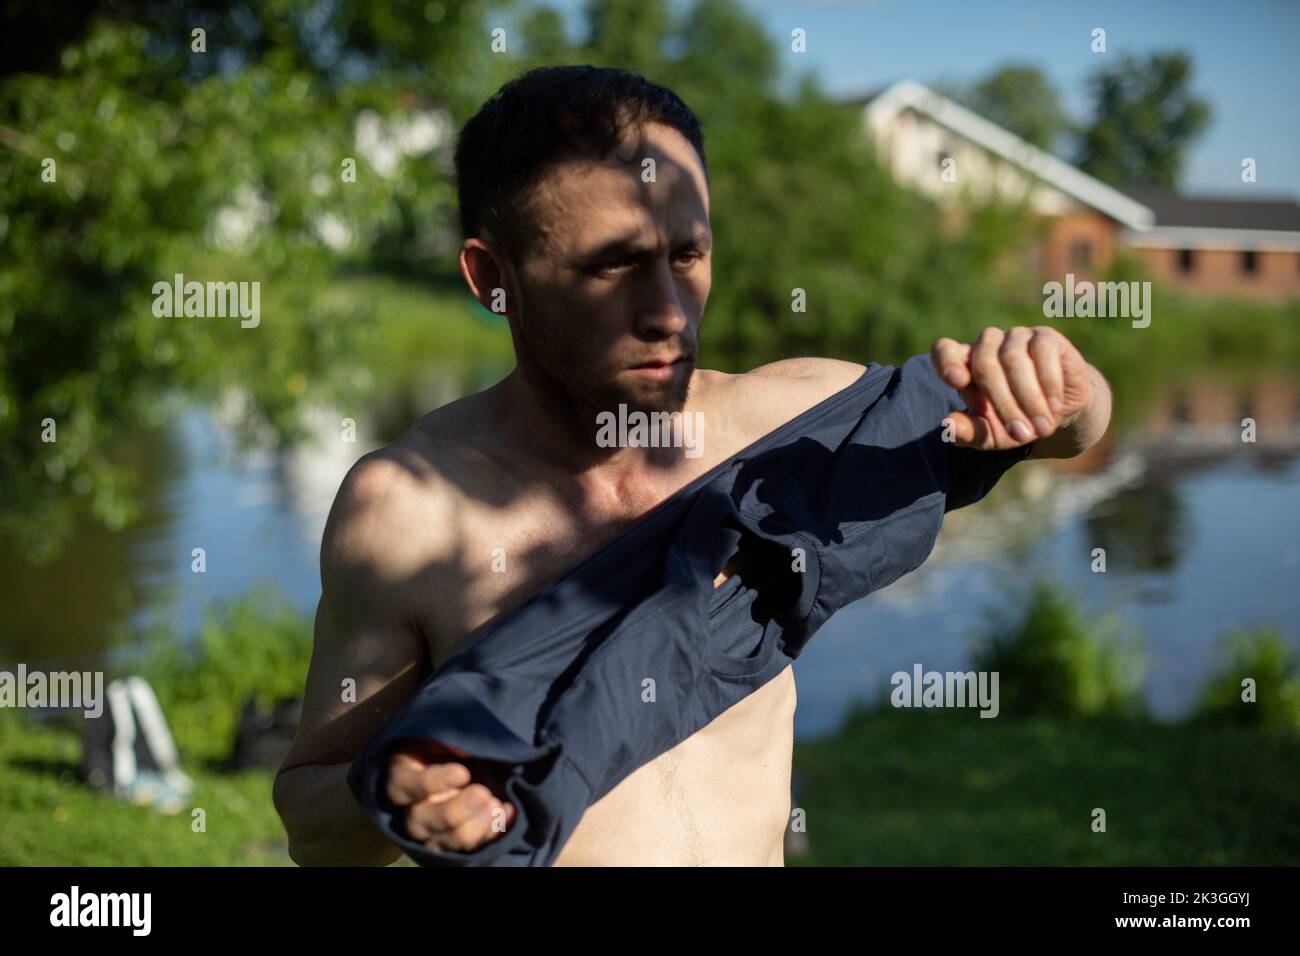 Guy on beach in summer. Man prepares to swim in lake. Guy took off his t-shirt. Tanning in summer. Stock Photo